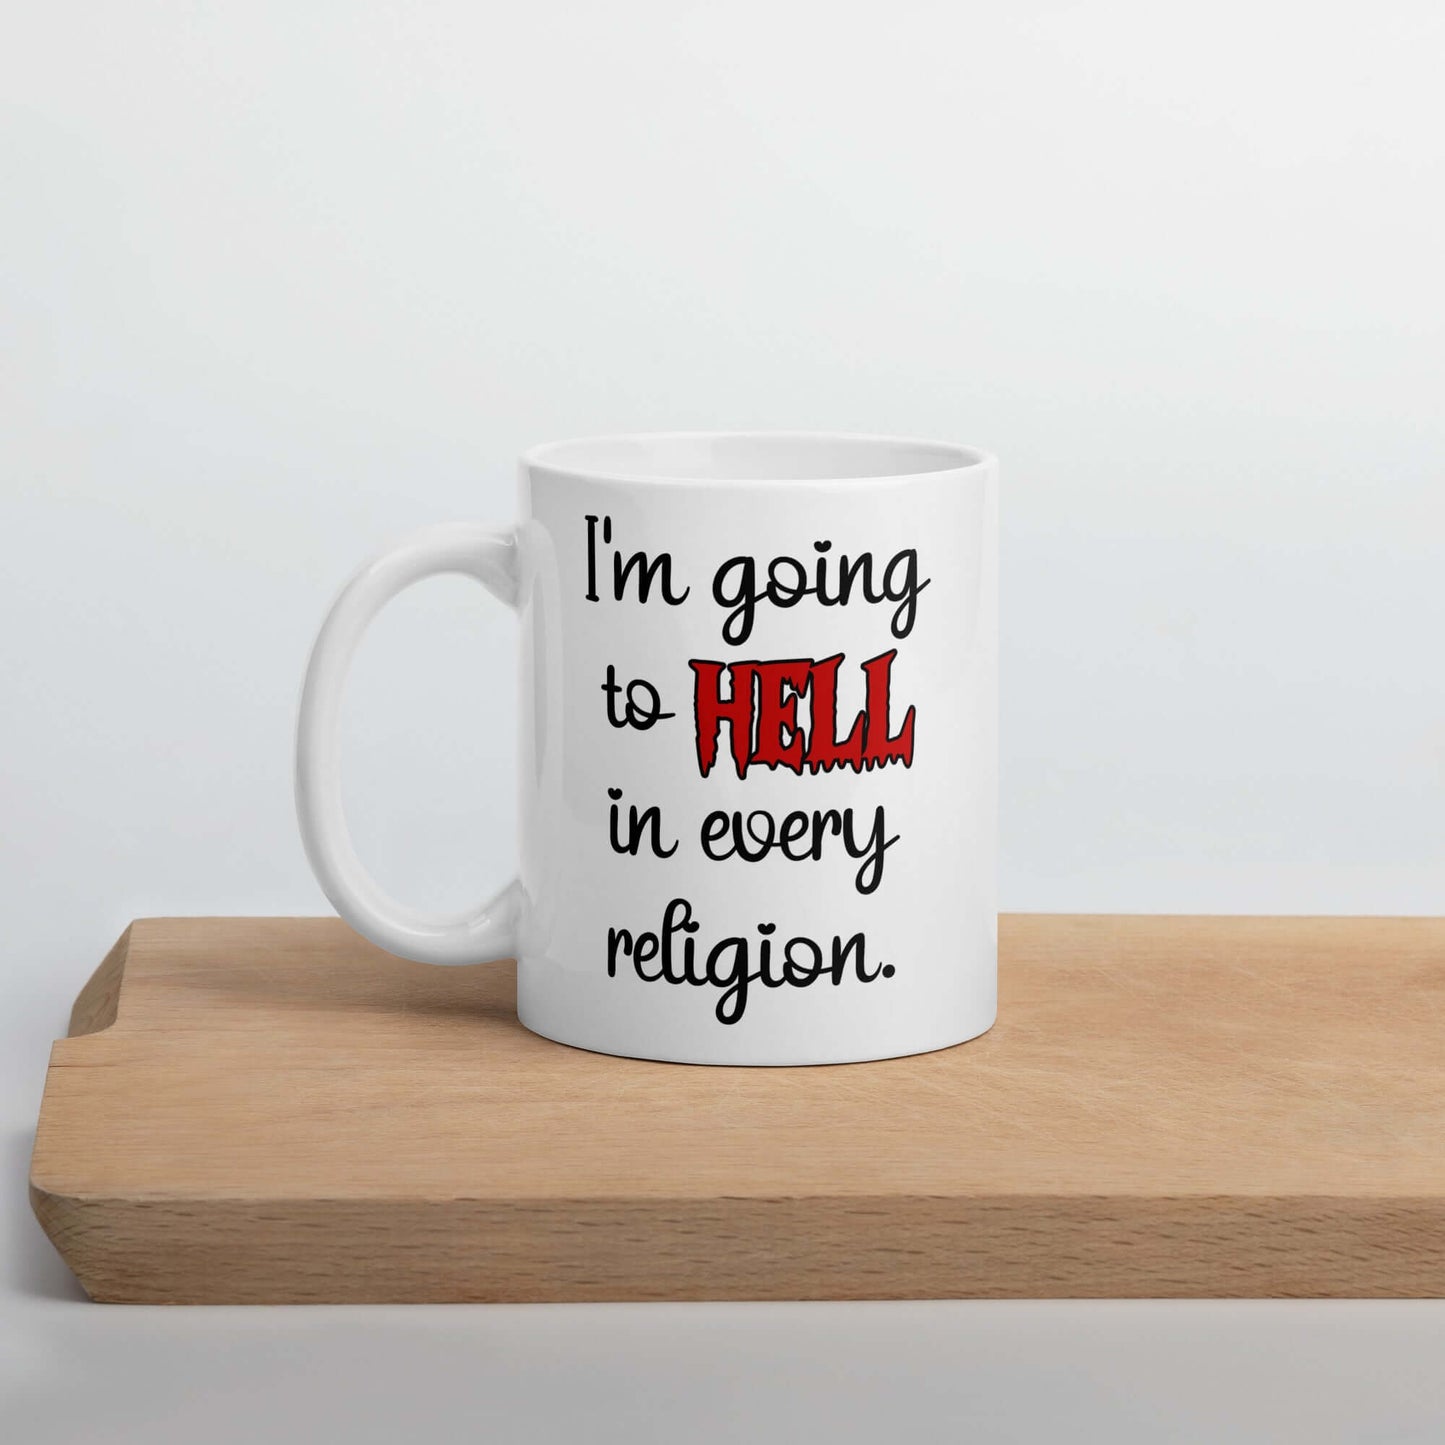 I'm going to hell in every religion ceramic mug